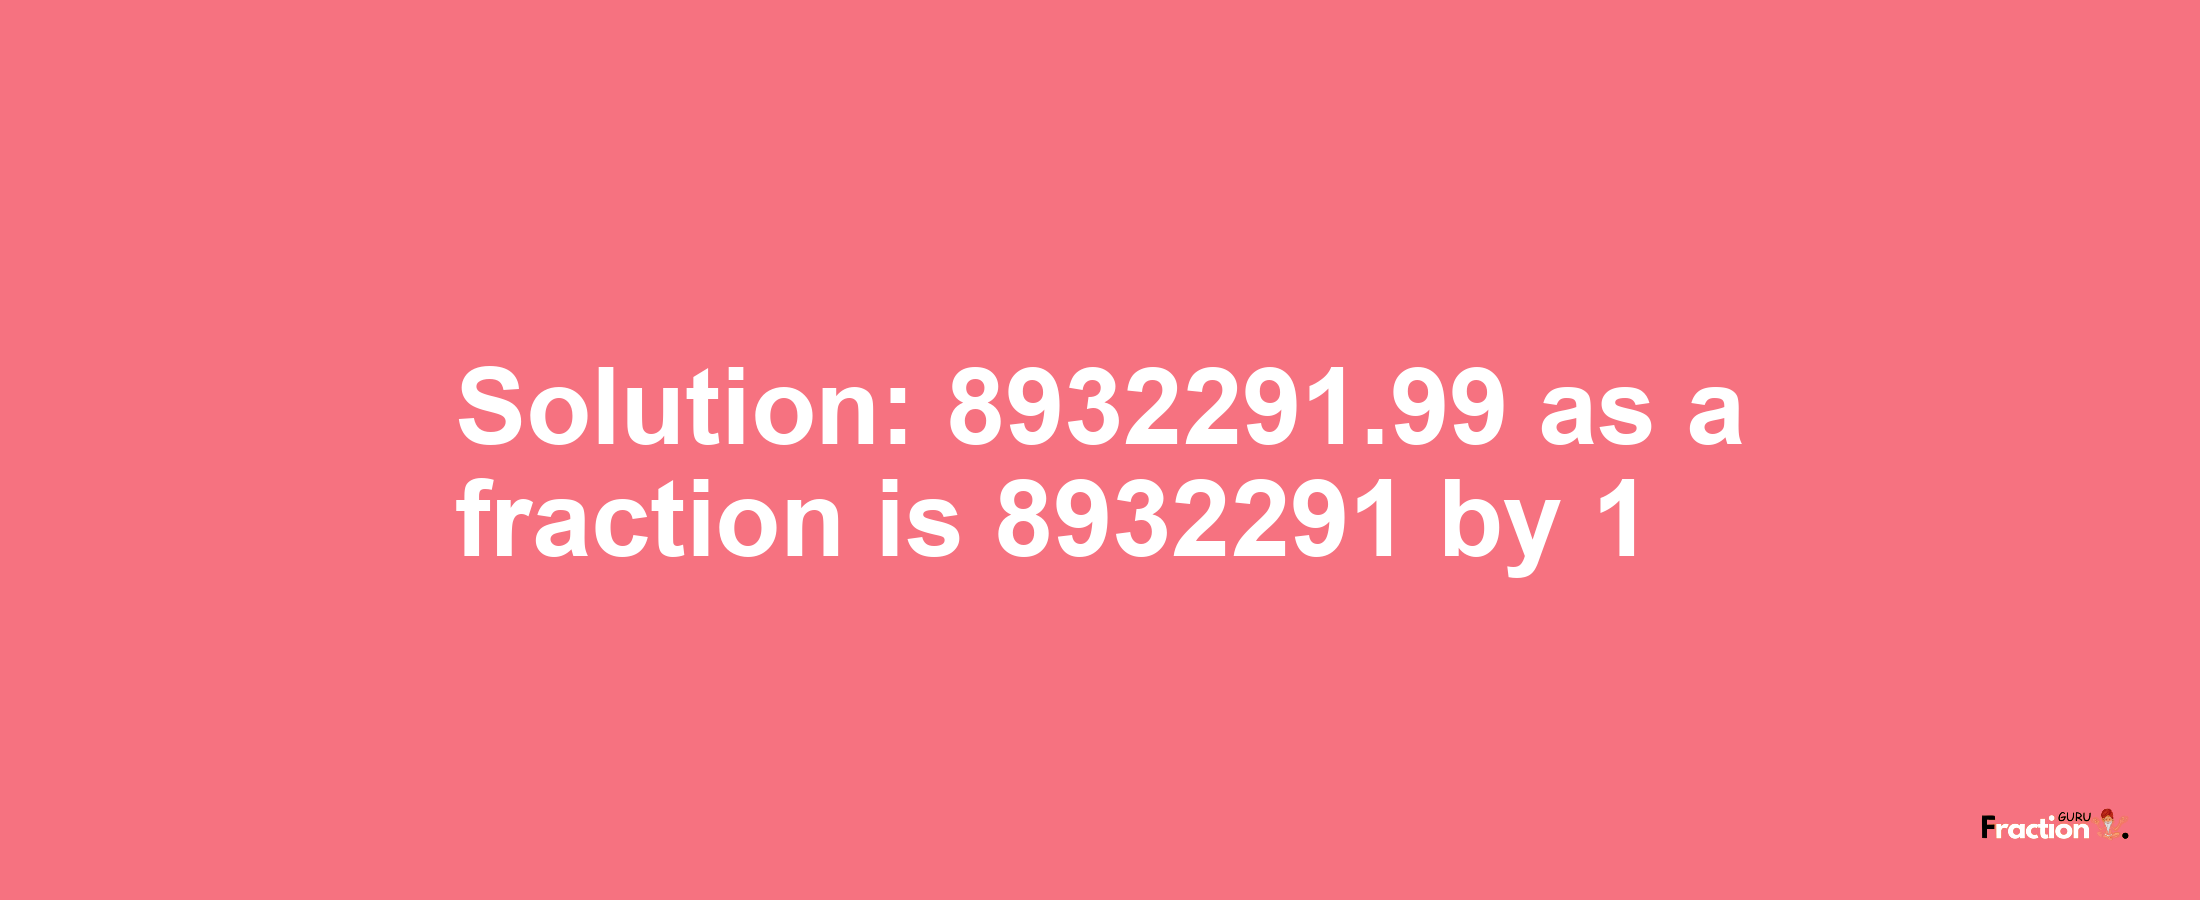 Solution:8932291.99 as a fraction is 8932291/1